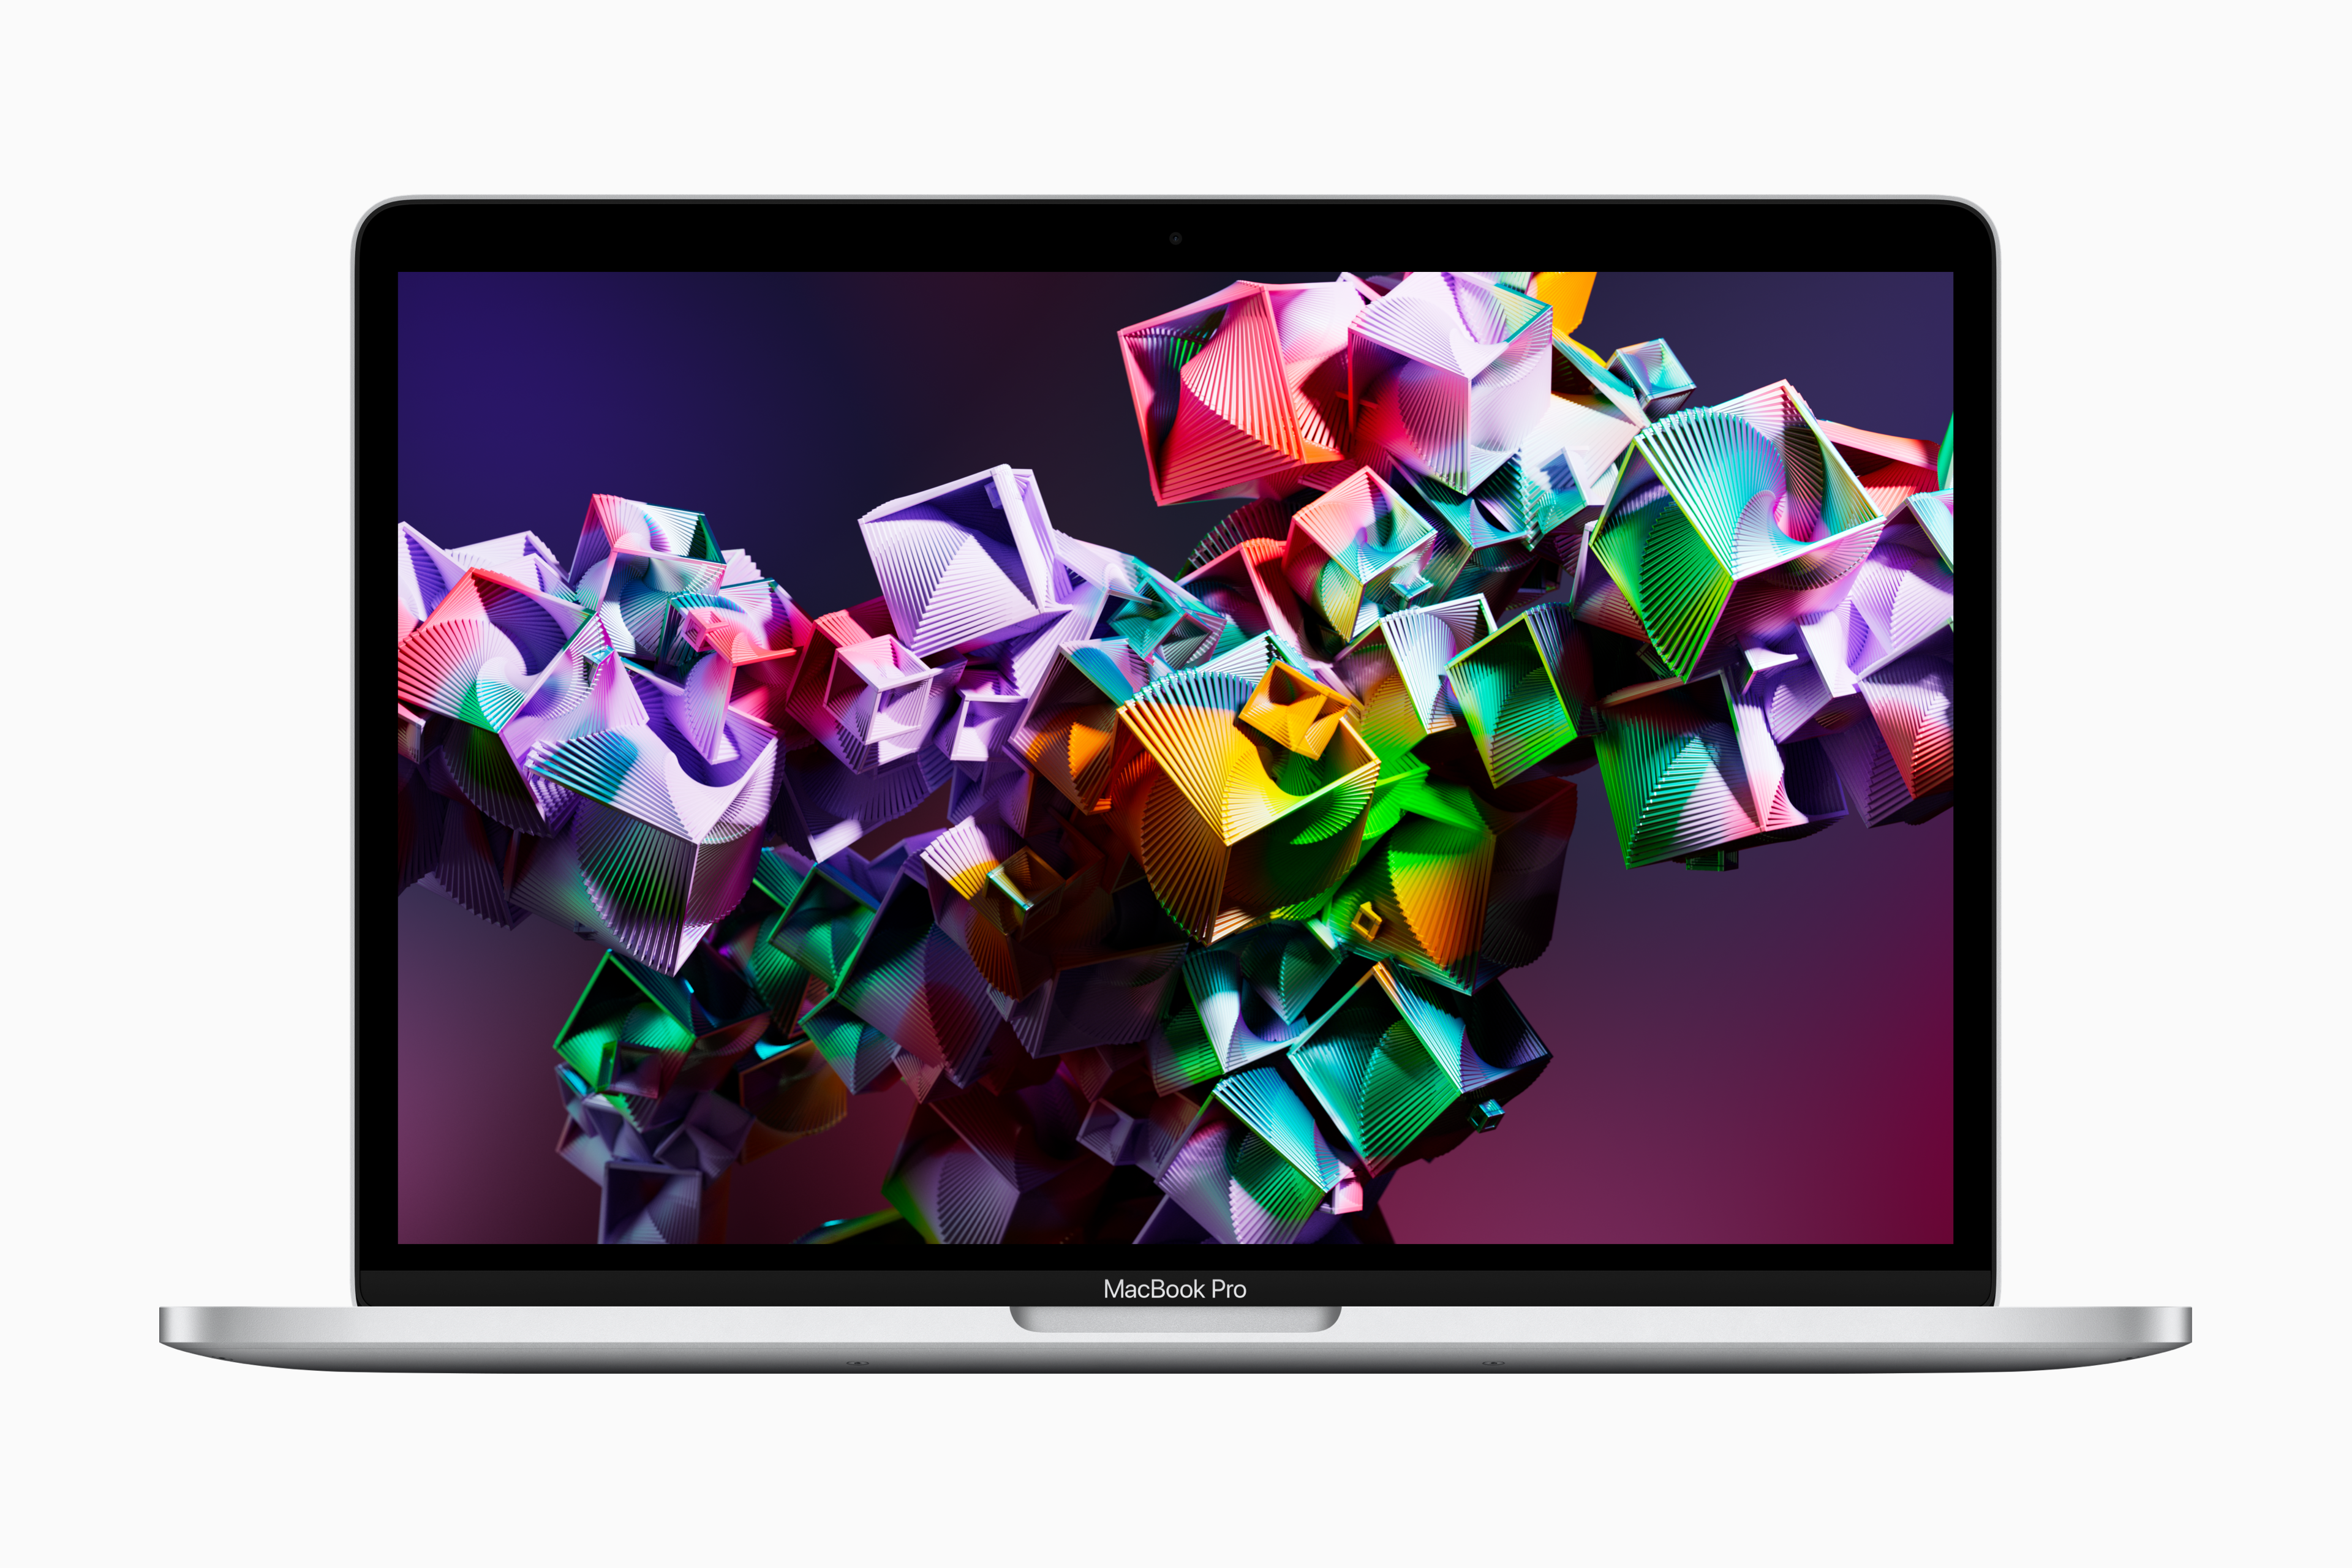 The M2 MacBook Pro with bright colours on the screen